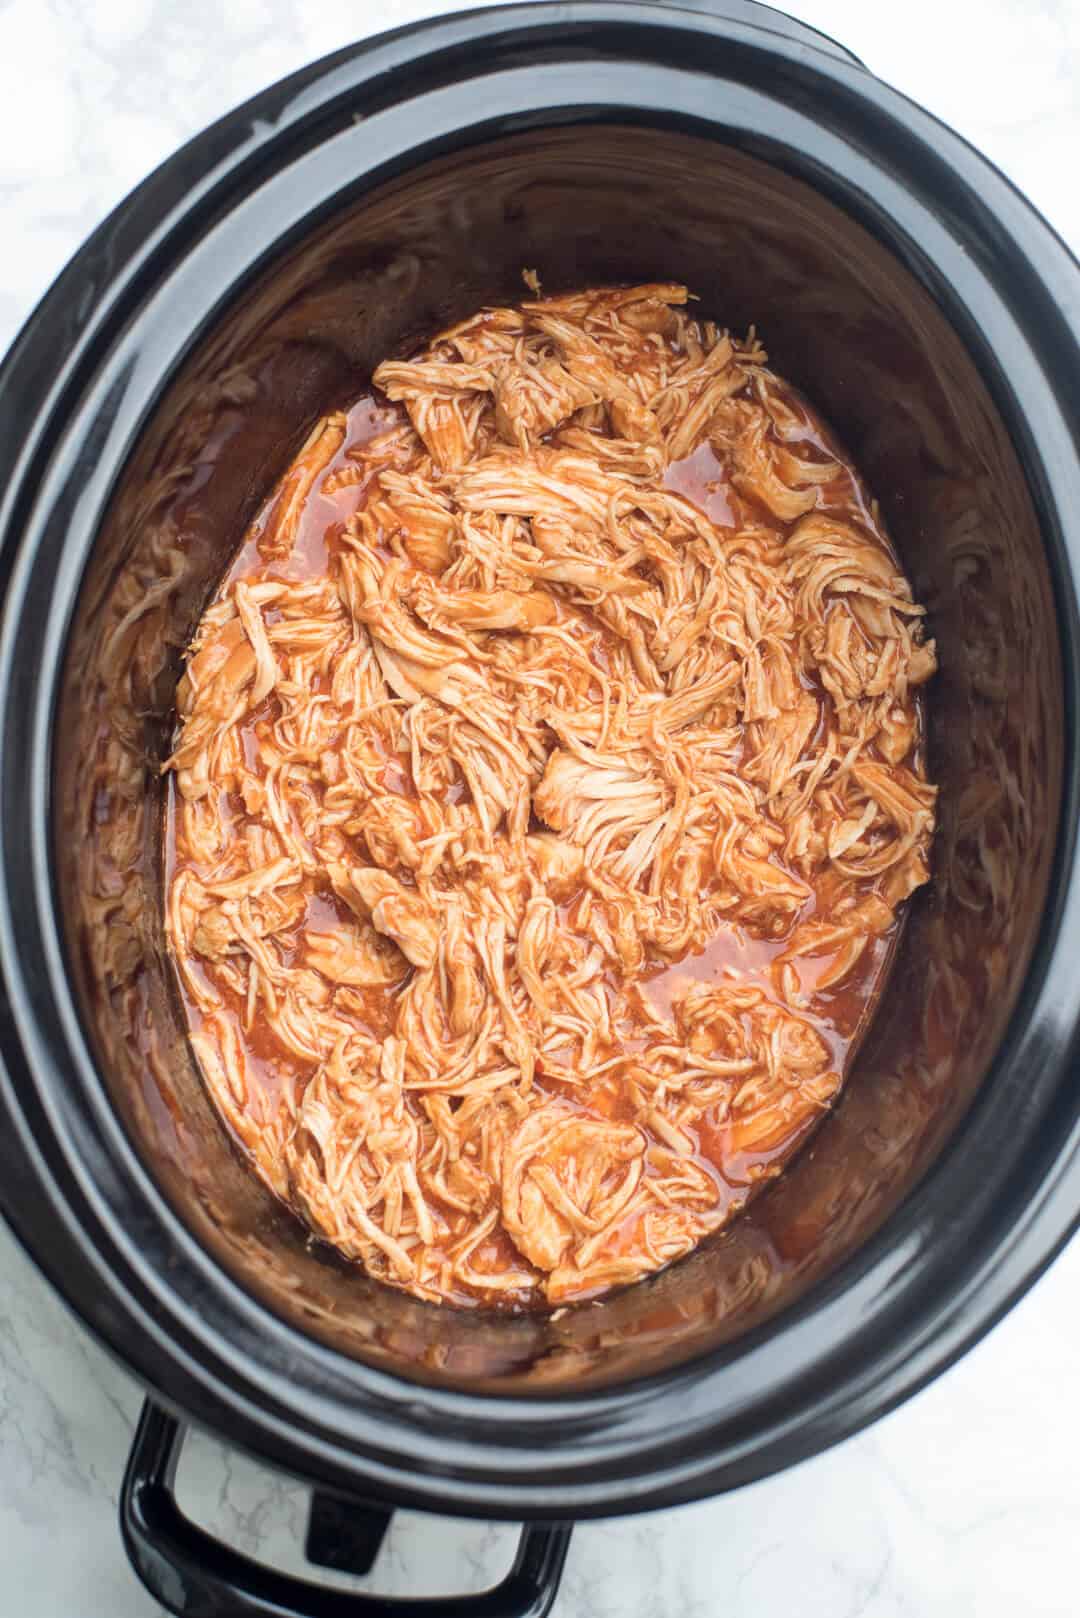 Cooked shredded chicken in BBQ and wing sauce in a slow cooker.